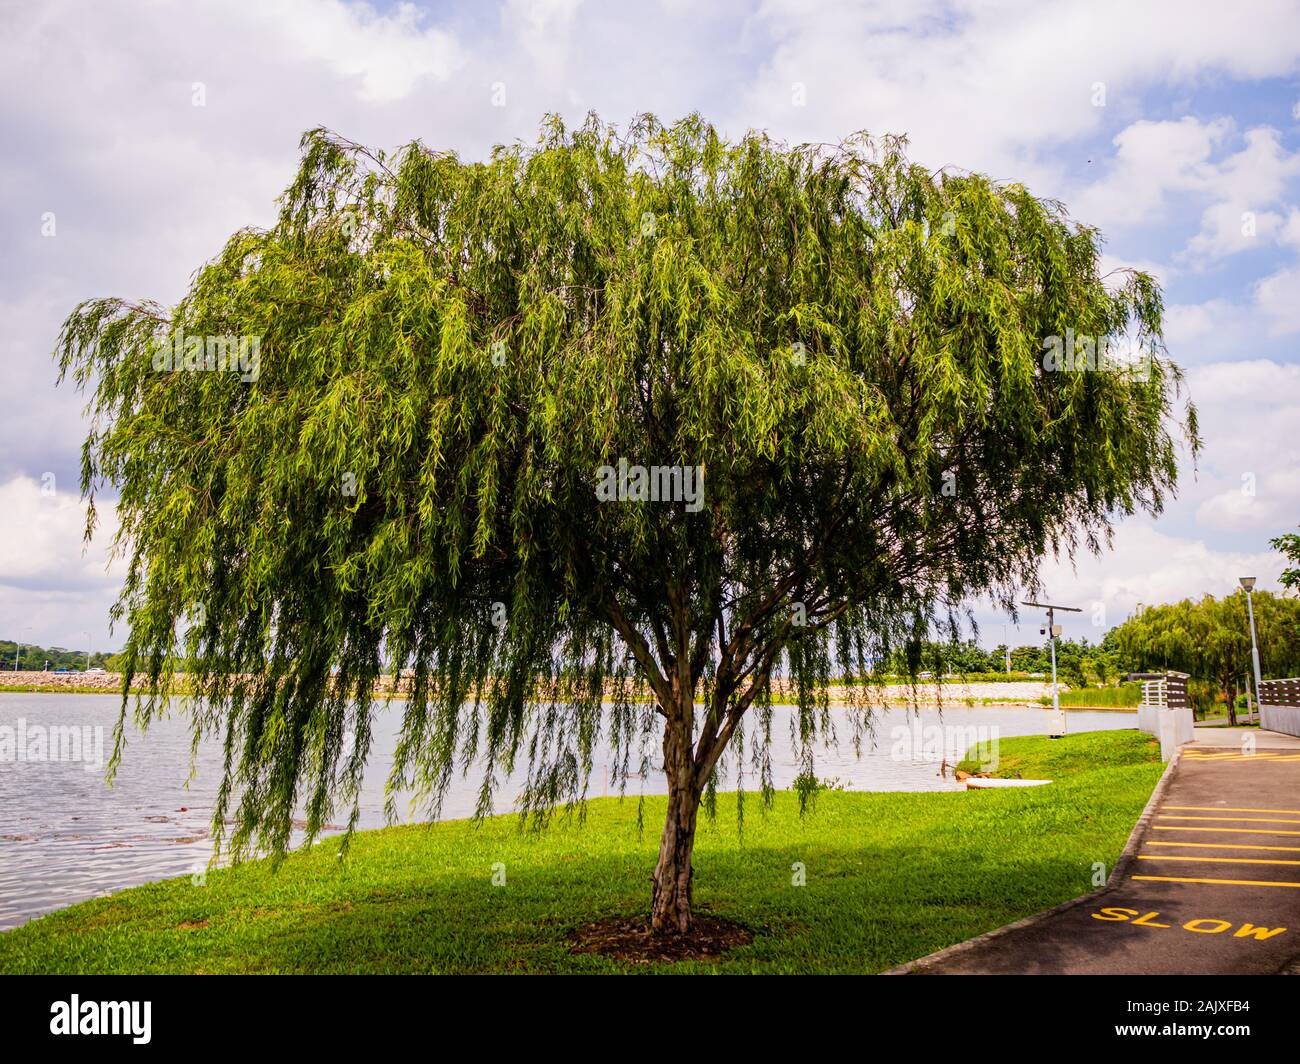 A large willow / weeping willow tree by the water in a nature park in Yishun, Singapore on a sunny day Stock Photo